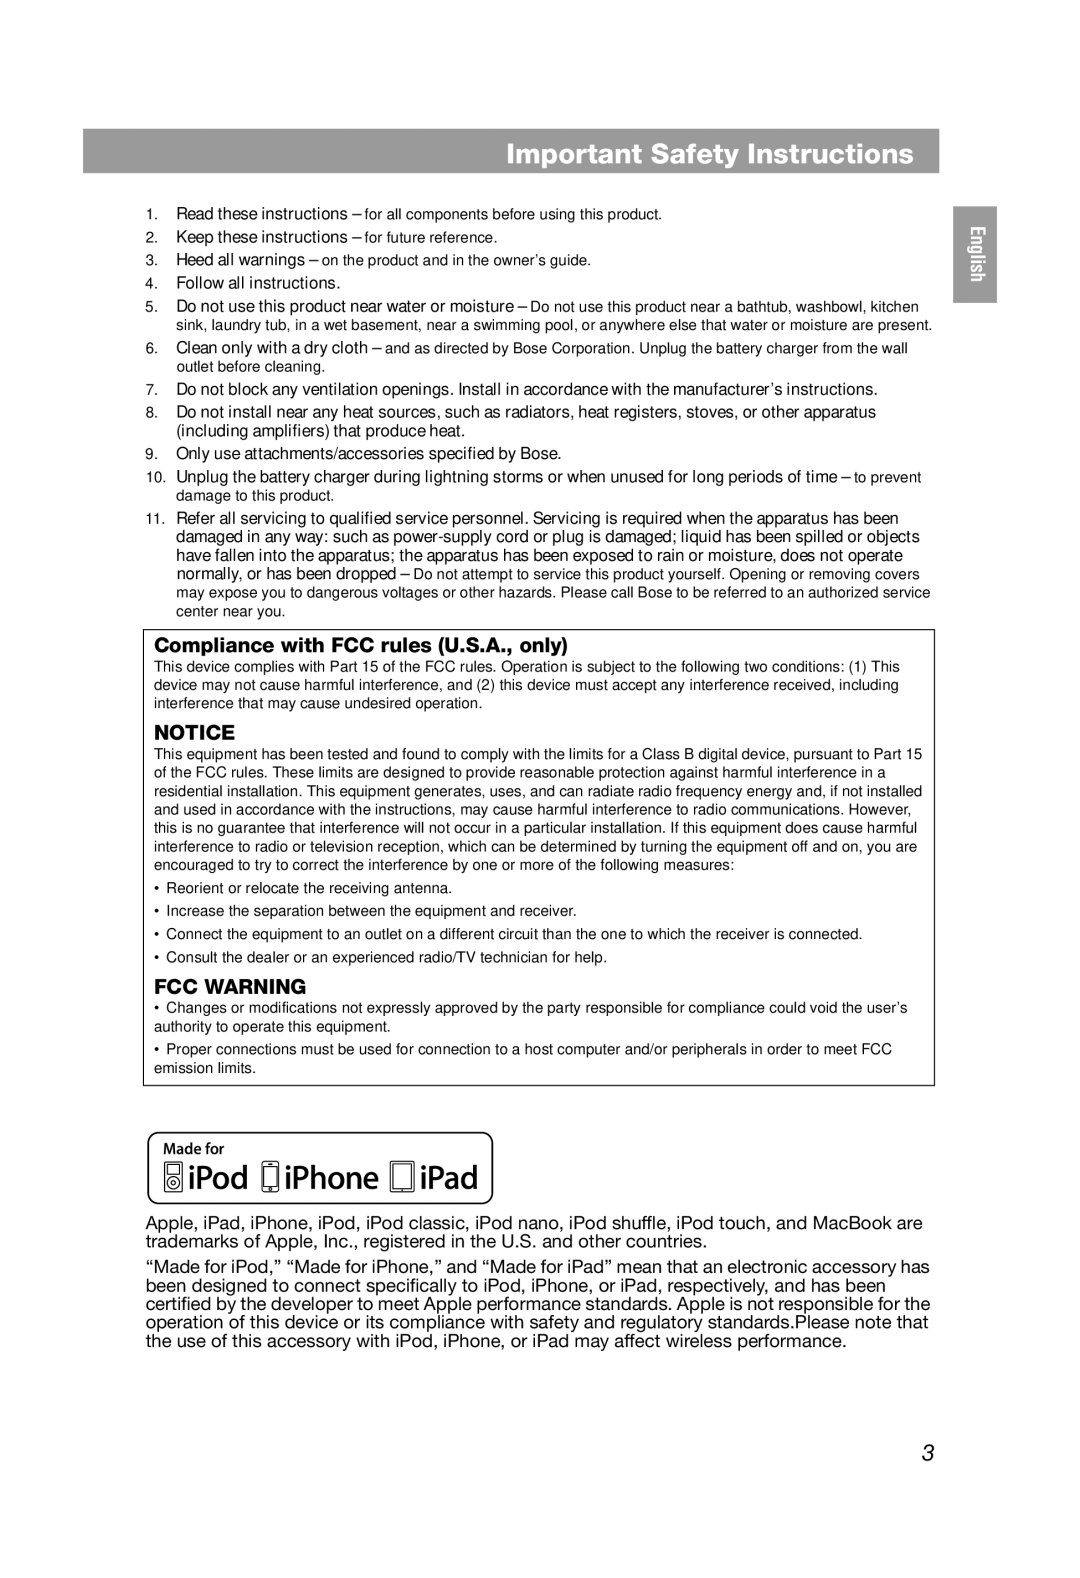 Bose QC3 manual Important Safety Instructions, Compliance with FCC rules U.S.A., only, Fcc Warning, Français, English 